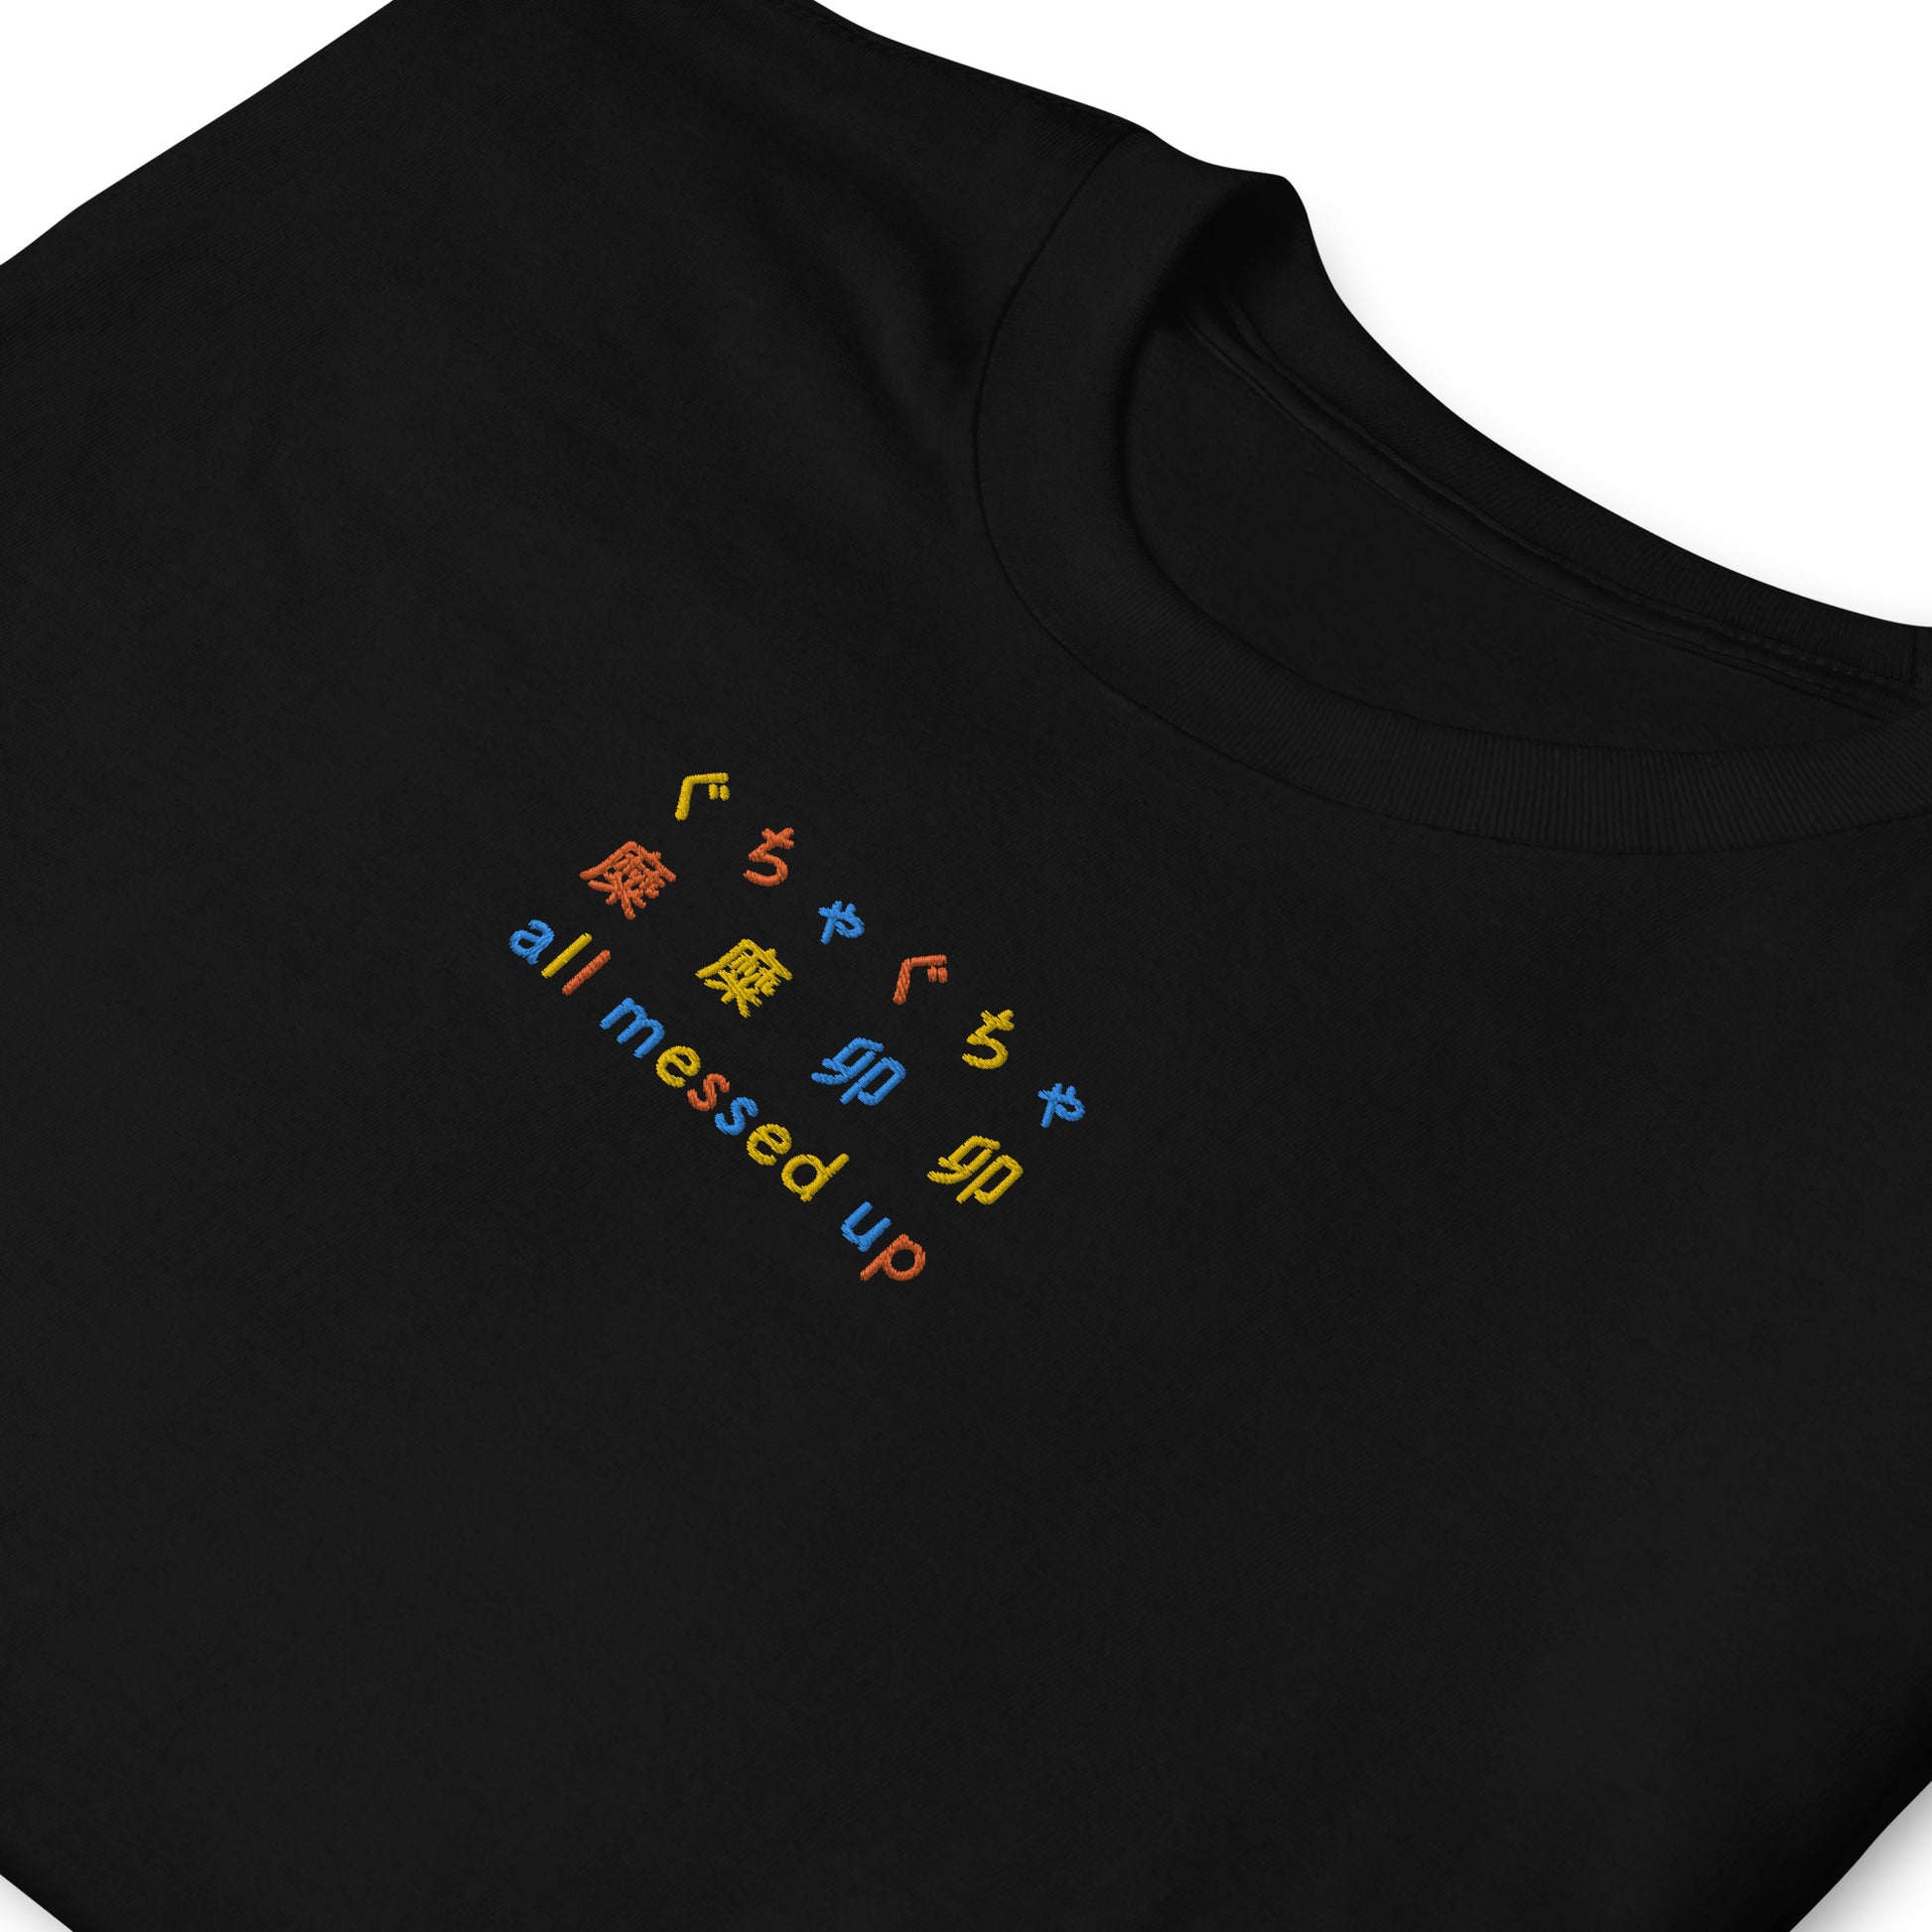 Black High Quality Tee - Front Design with an Yellow,Orange,Blue Embroidery "All Messed Up" in Japanese,Chinese and English